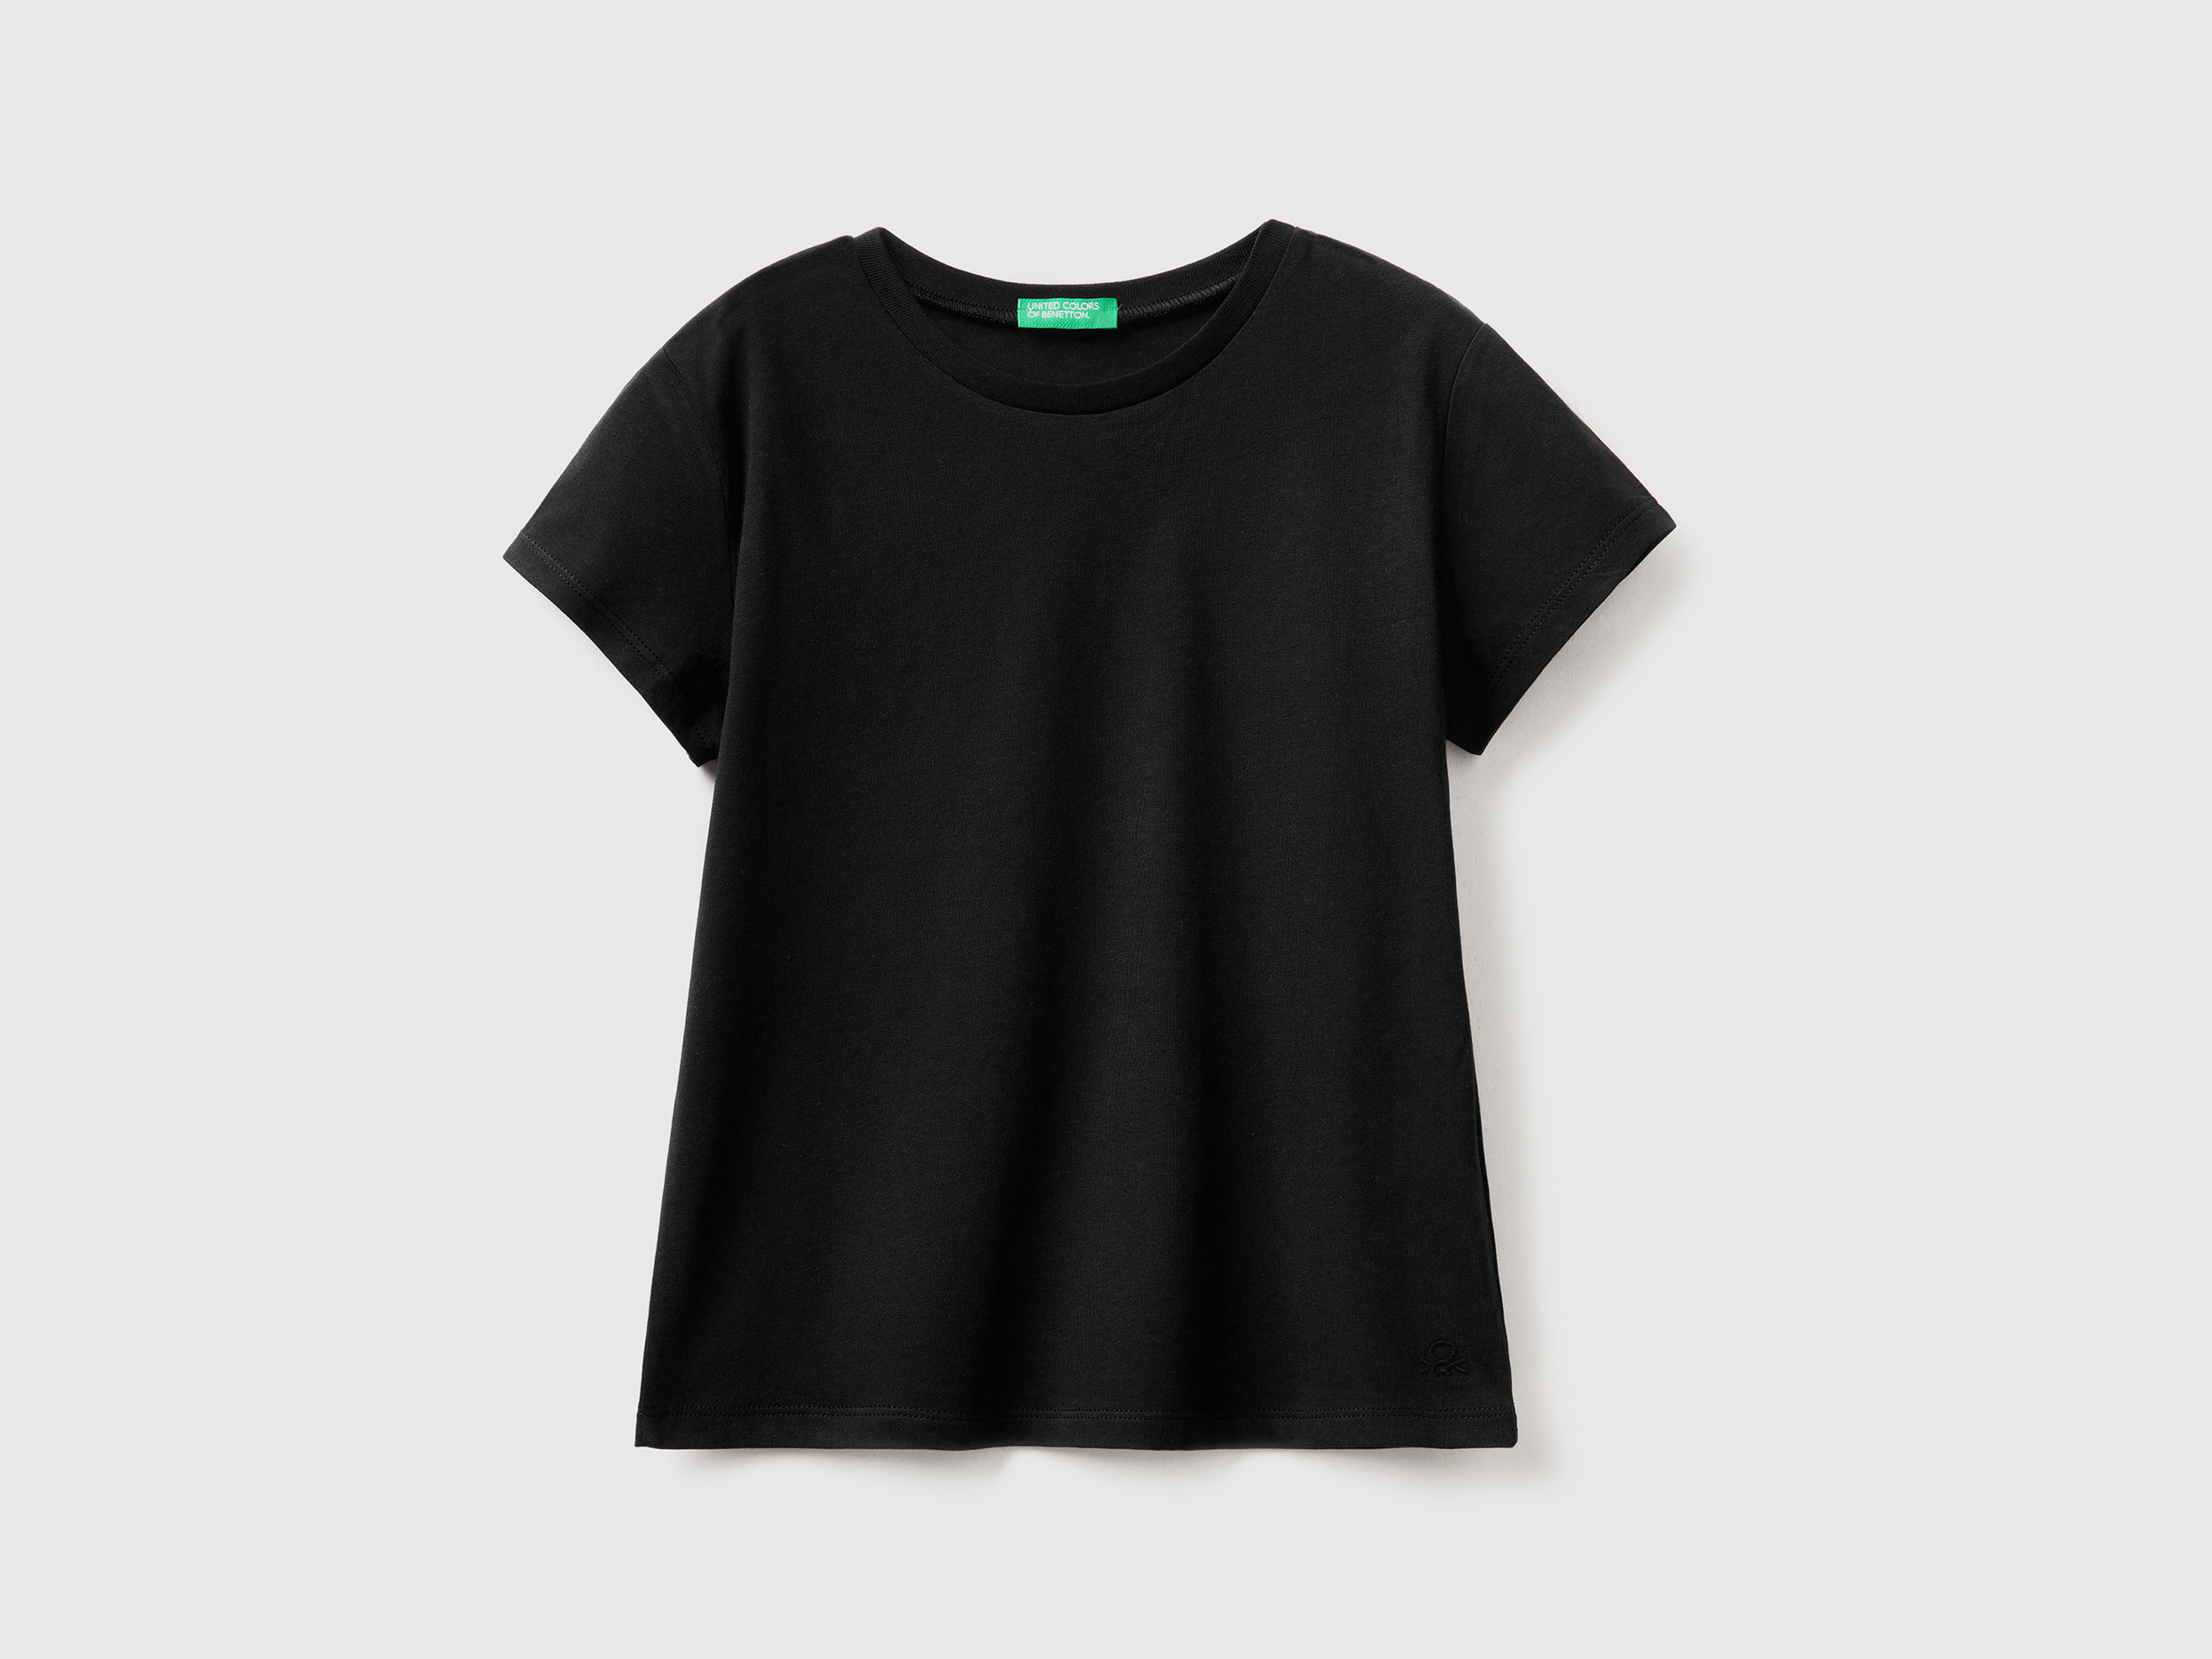 Image of Benetton, T-shirt In Pure Organic Cotton, size 2XL, Black, Kids